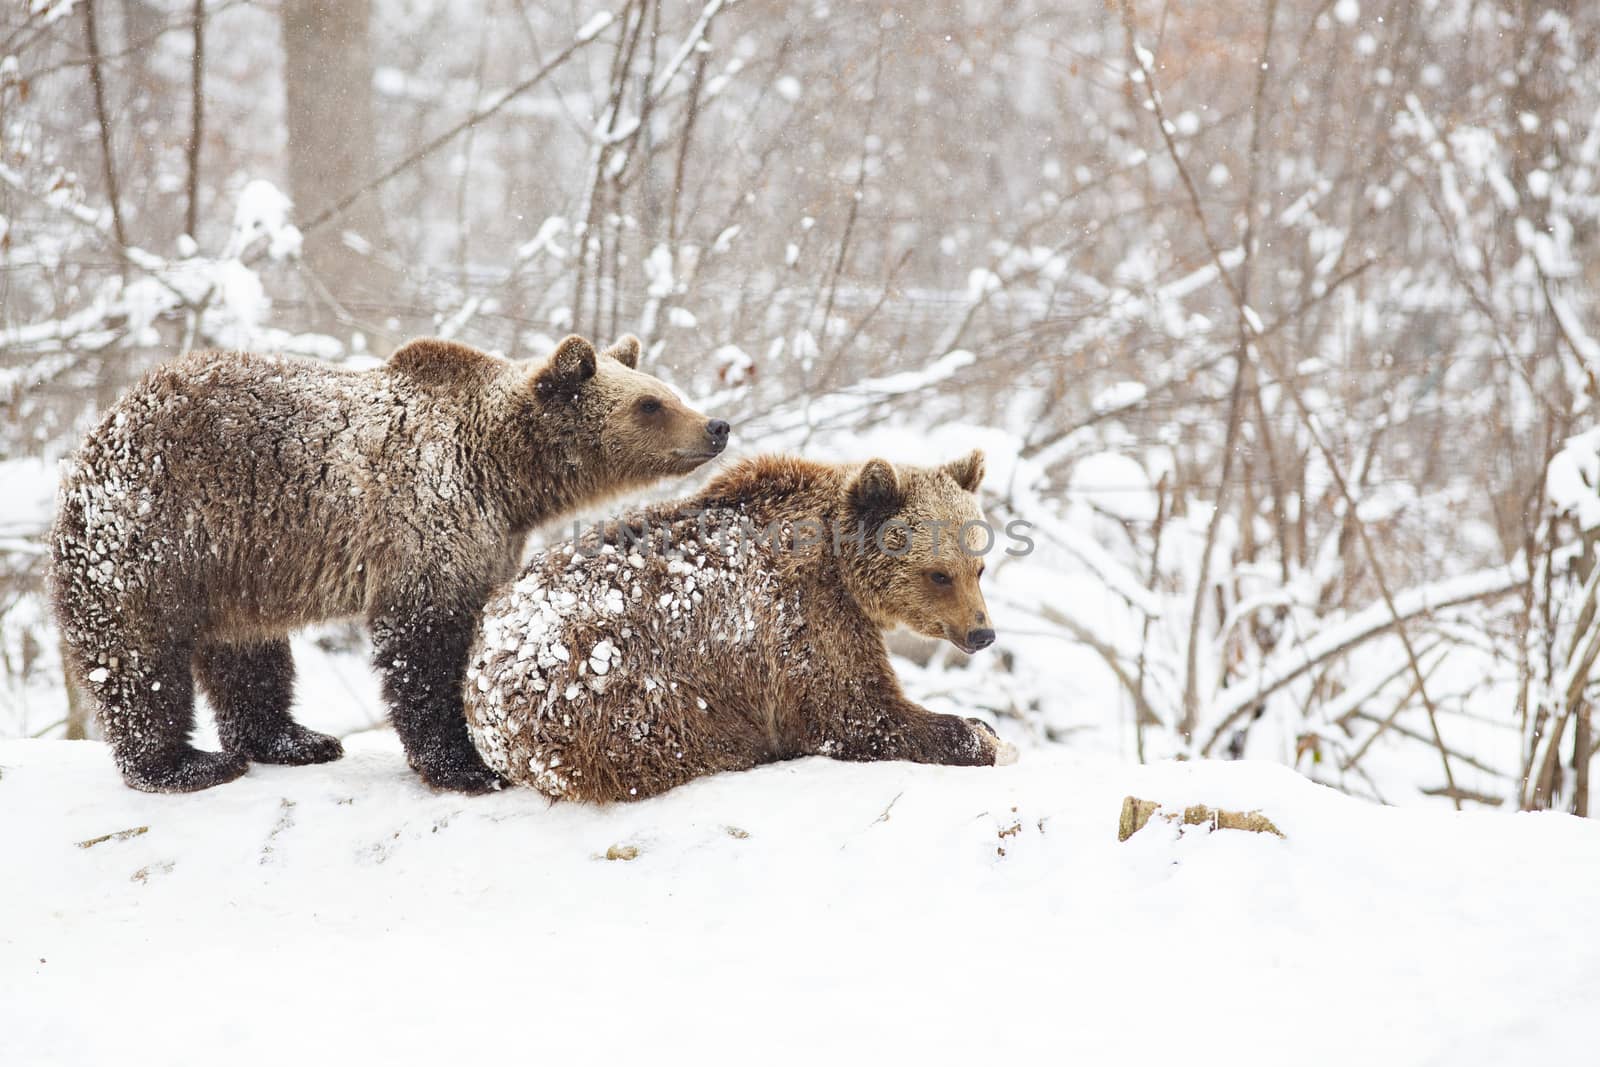 bear cubs playing in snow